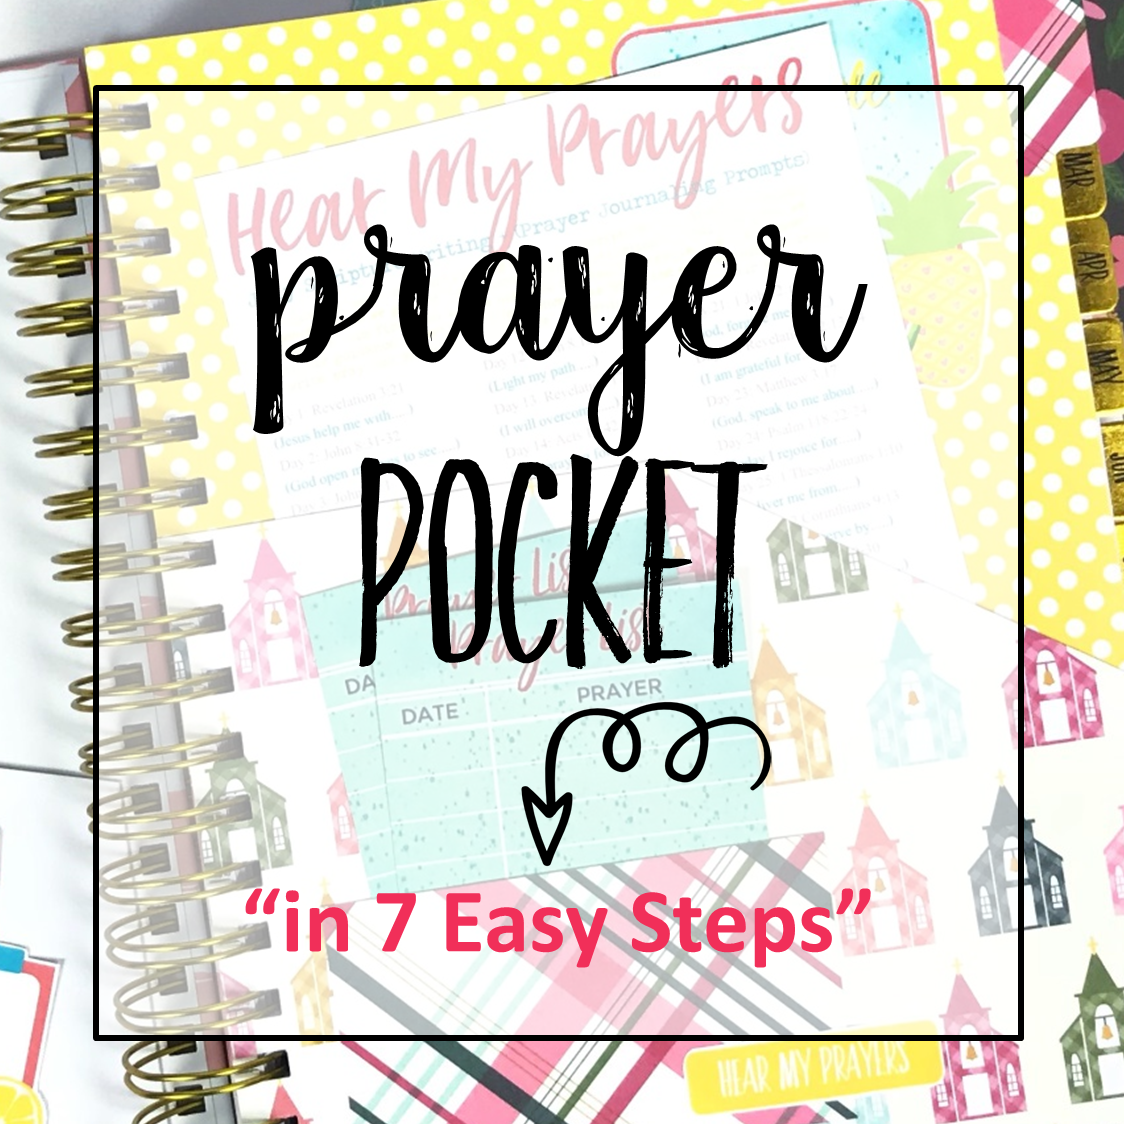 How to Make a Simple Prayer Pocket for Your Prayerful Planner!